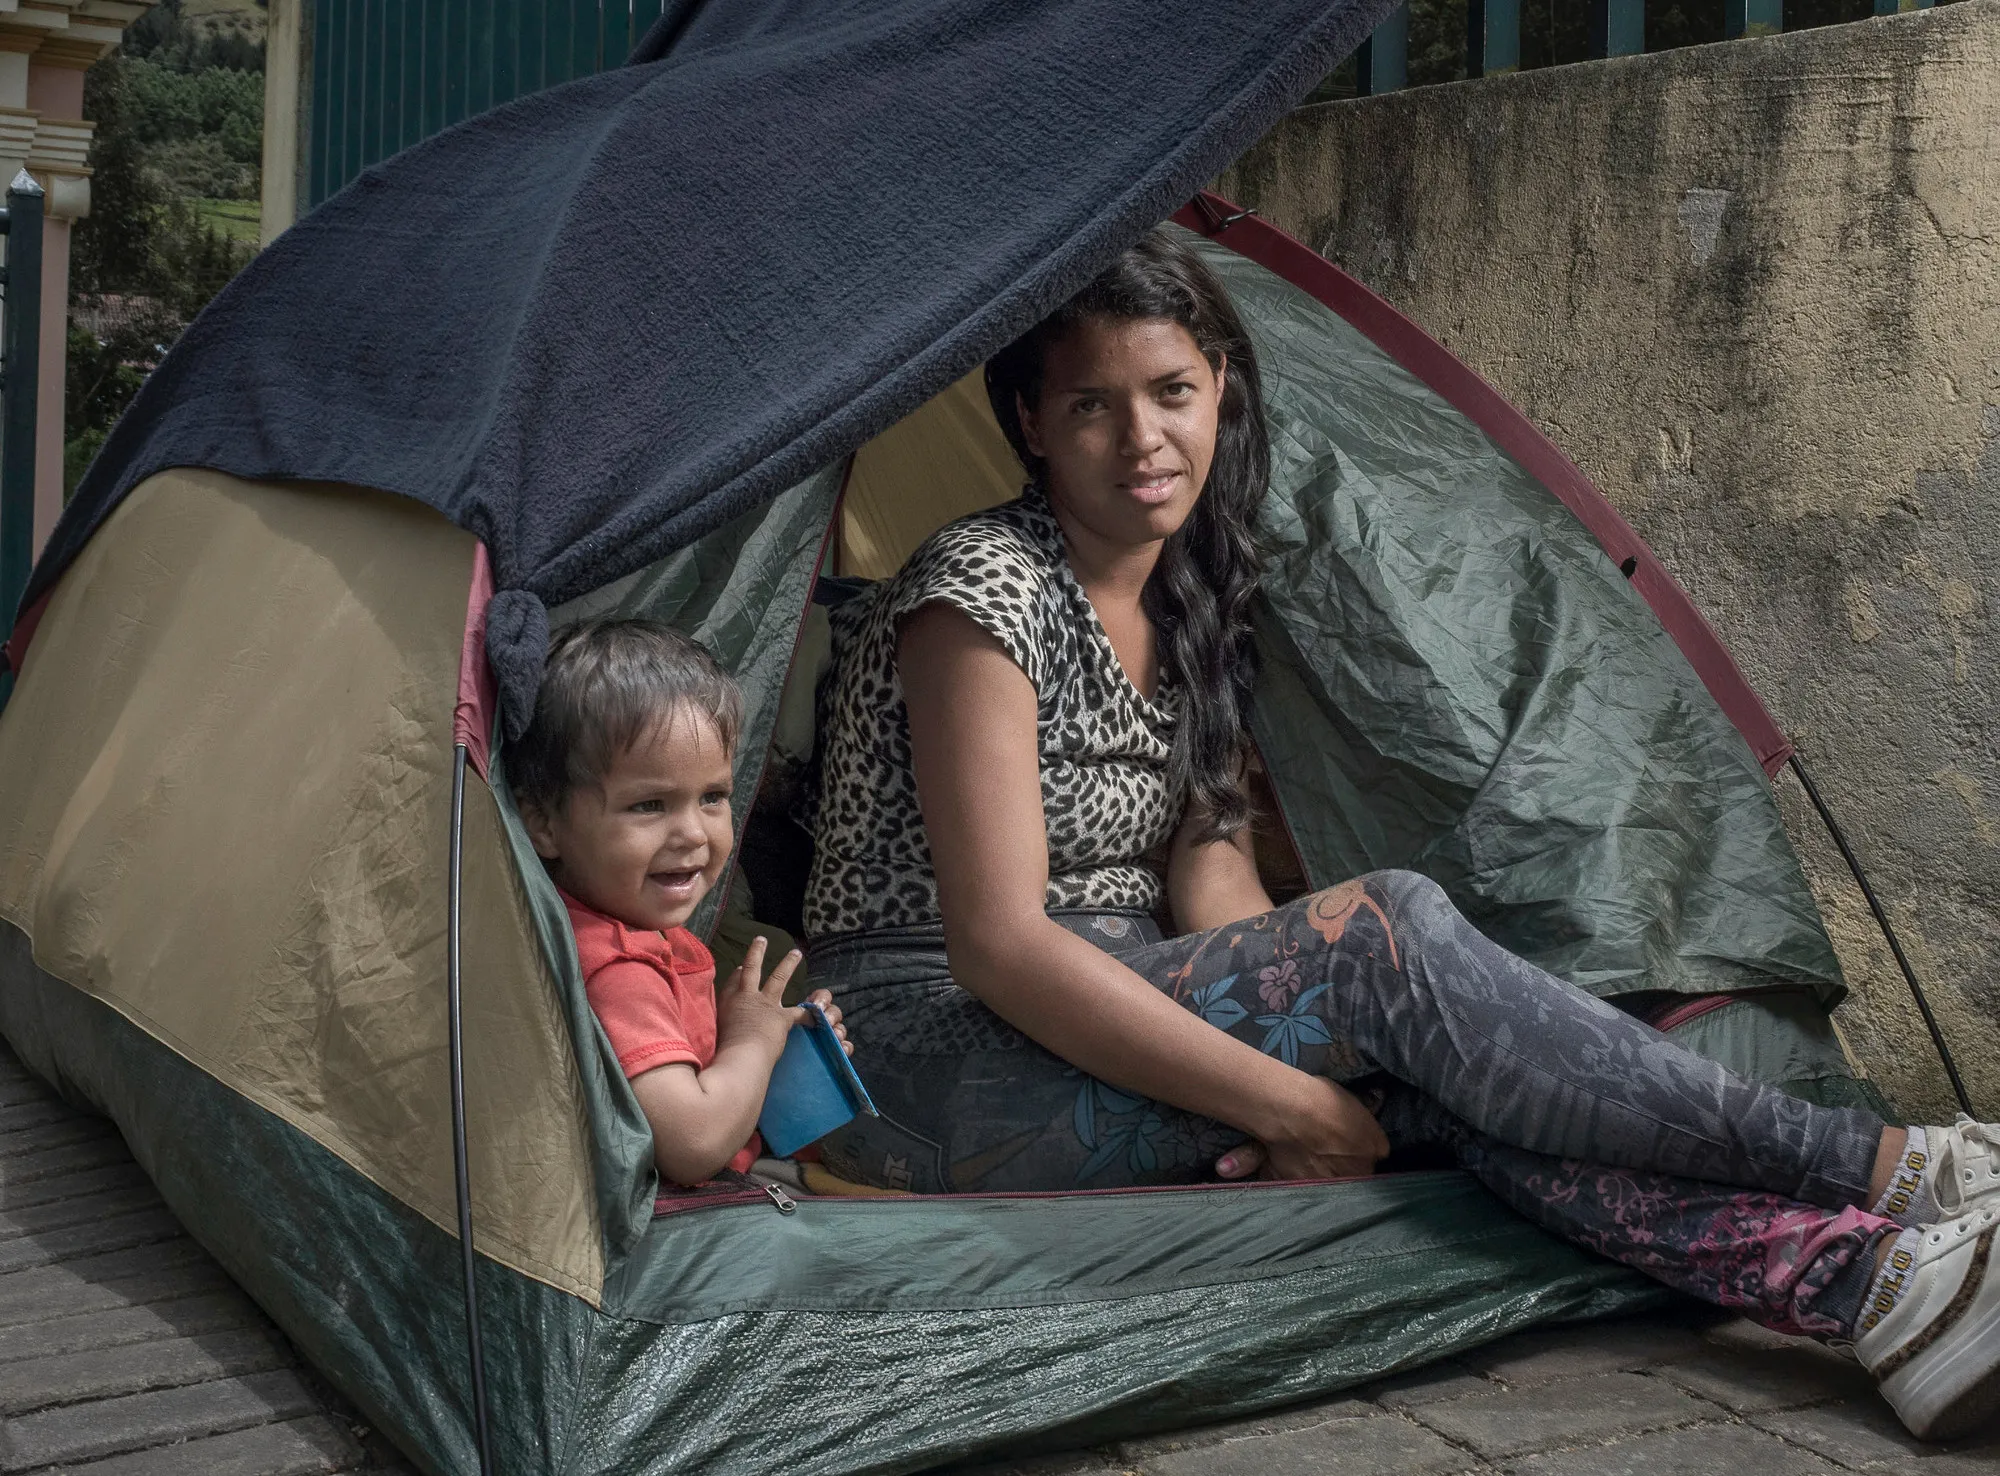 A woman and a child sit in a tent.